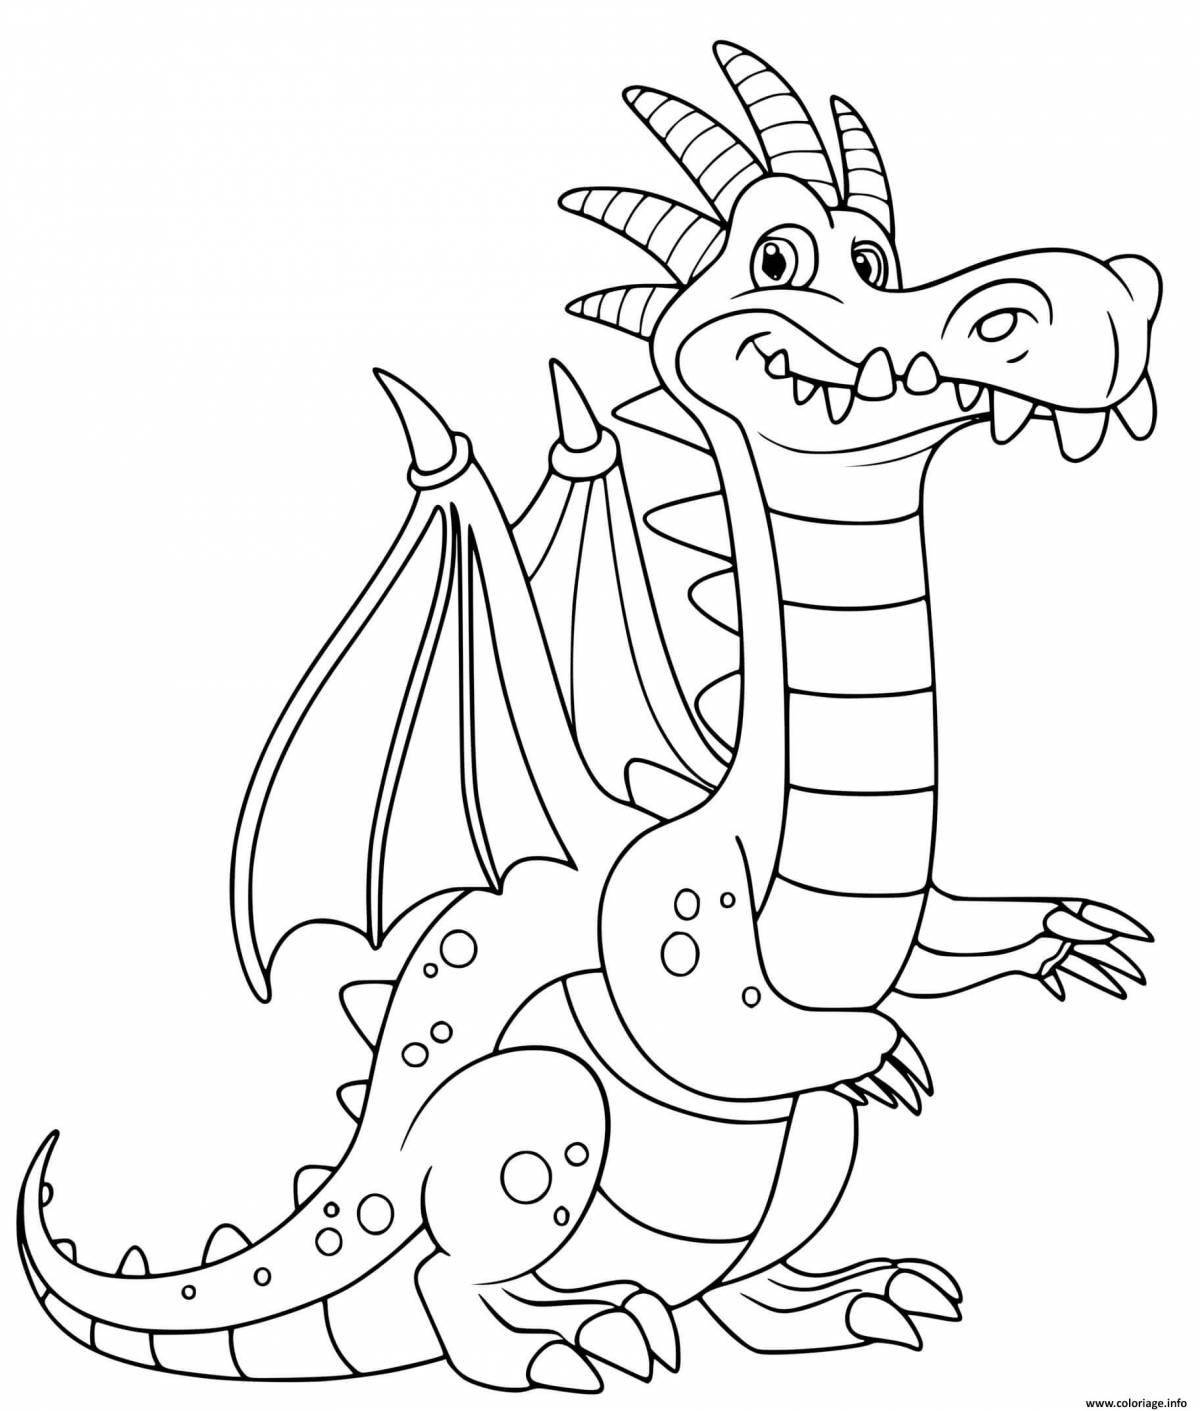 Colorful penguin dragon coloring page